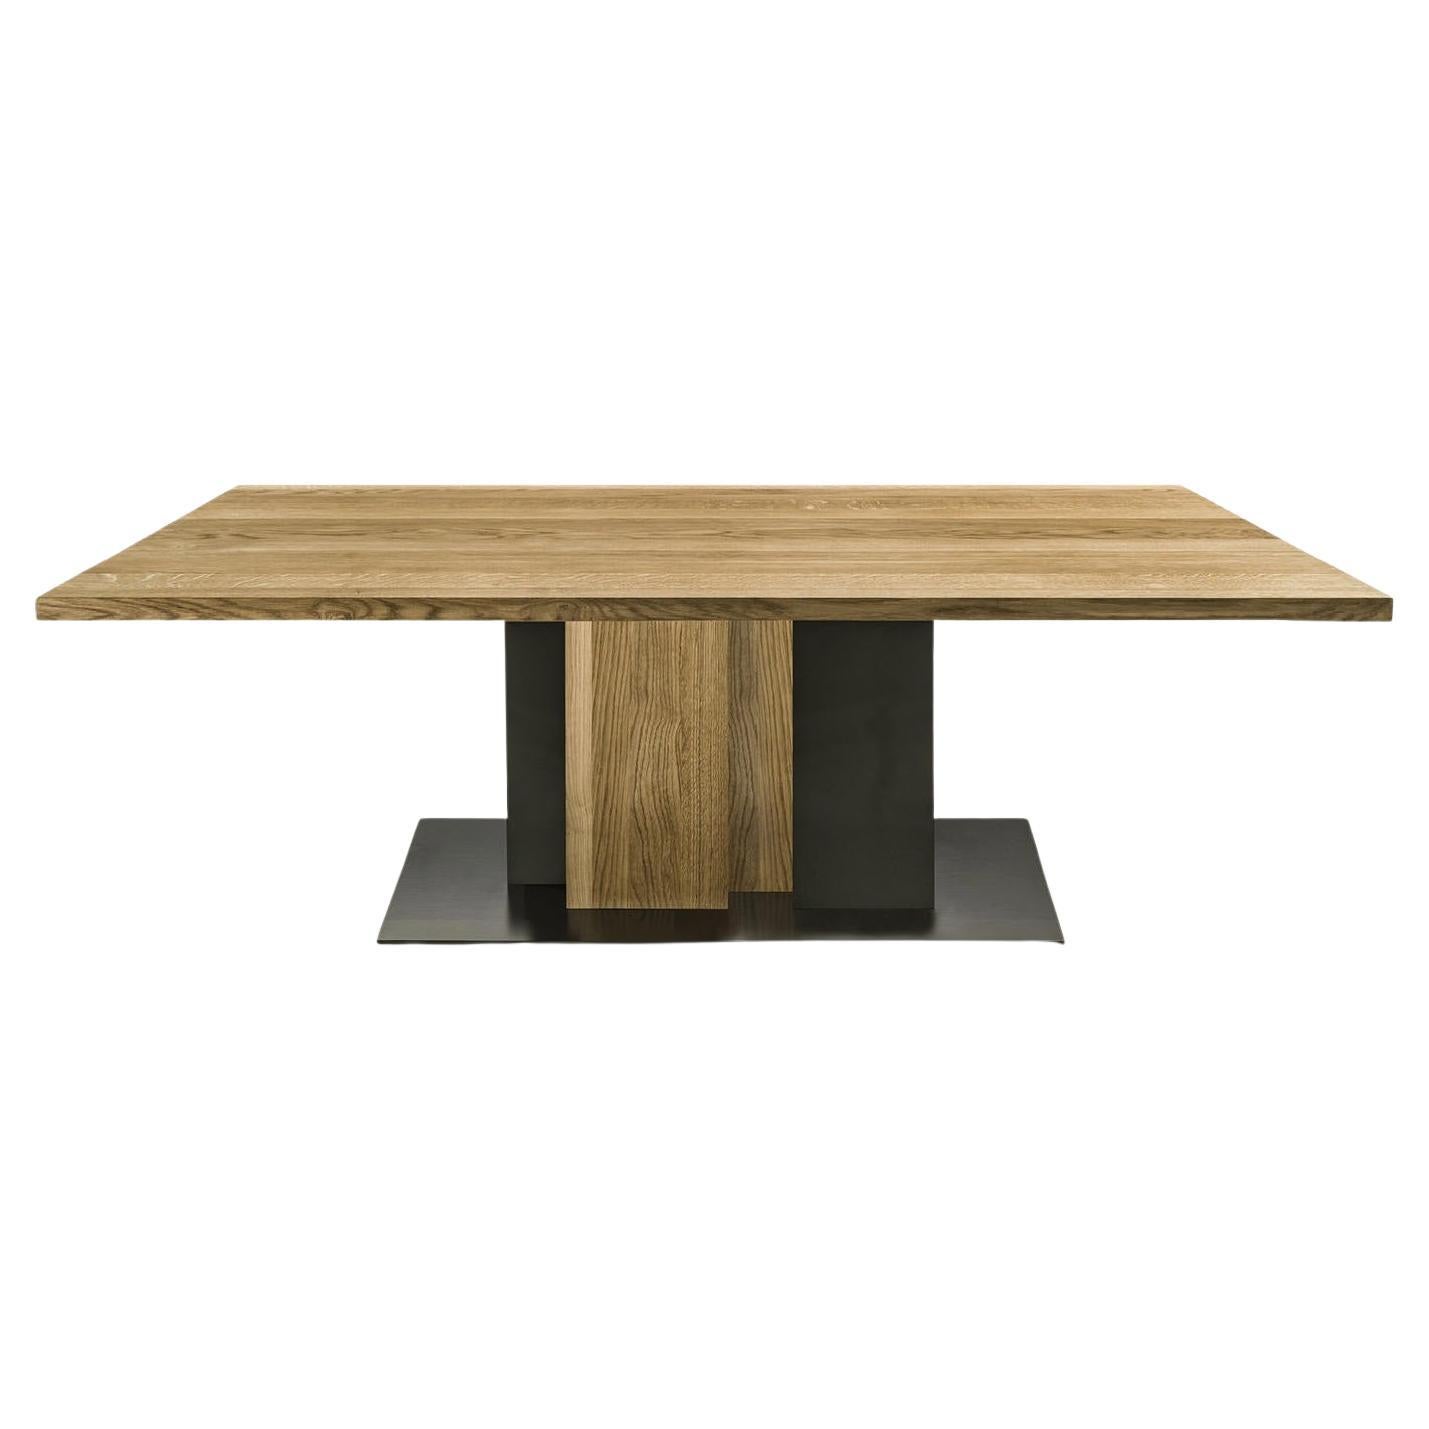 Rectangular Table Made to Order in Solid Oak with Knots & Lacquered Iron For Sale